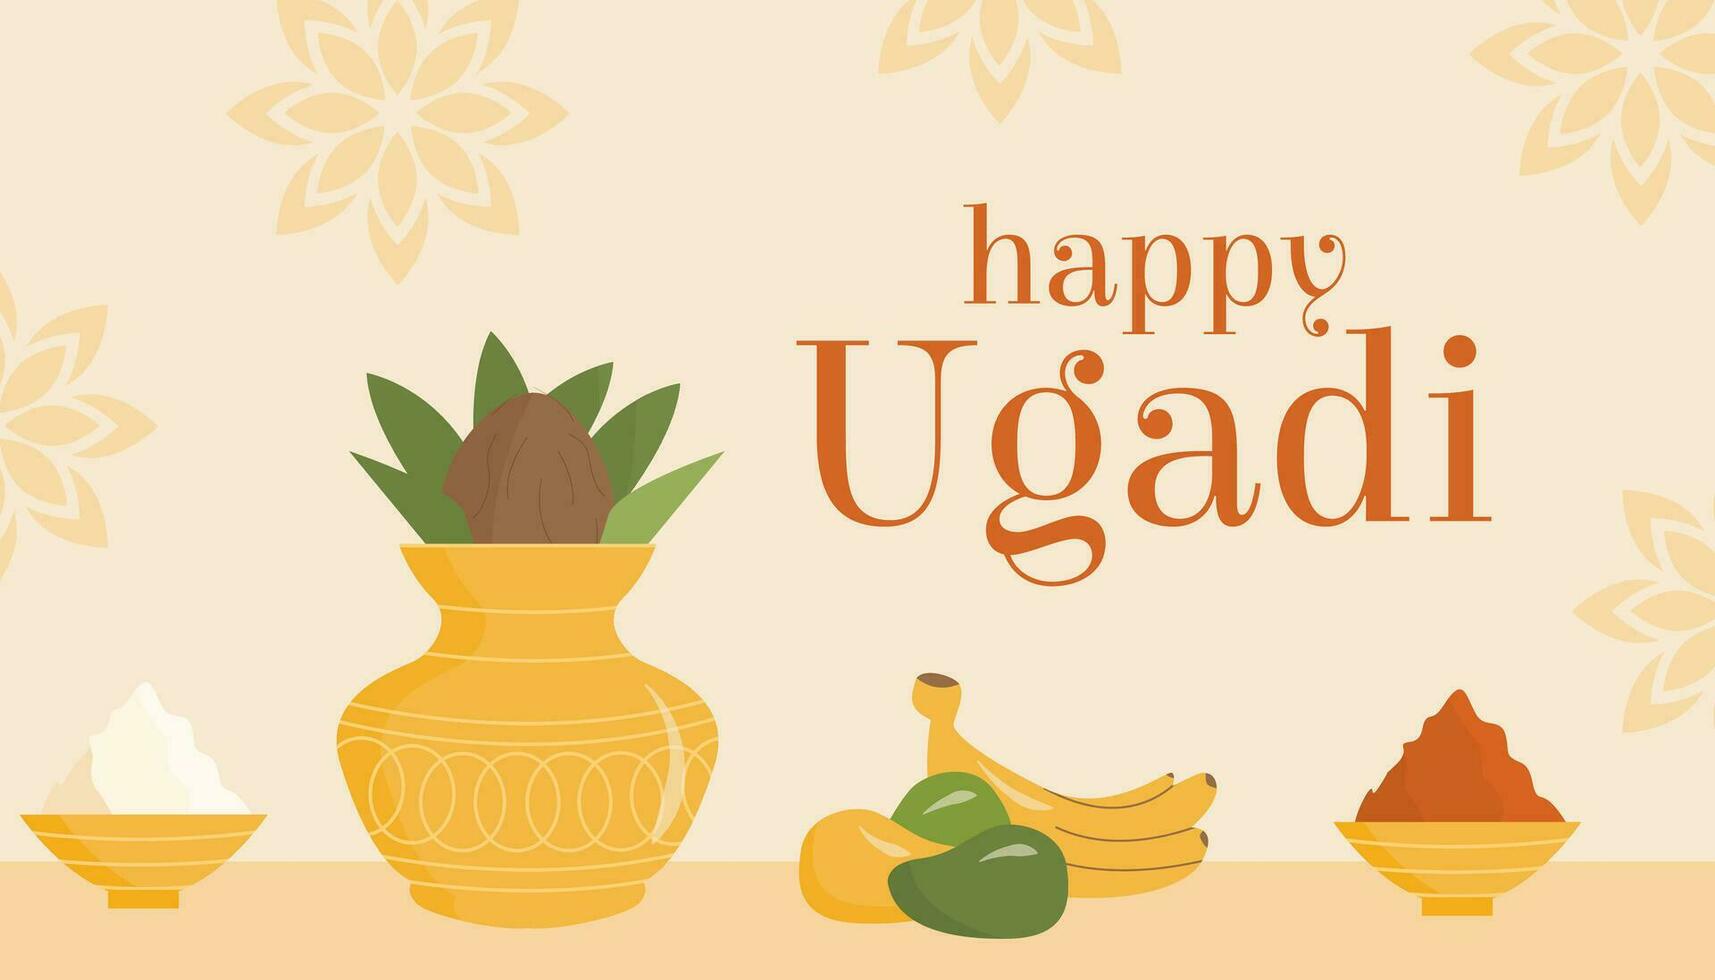 Happy Ugadi Festival Kannada Translation Happy Lunar New Year. South India Holiday. Offering of kalash, coconut and mango leaf on yellow background with marigold flowers. Trendy modern card. Vector. vector